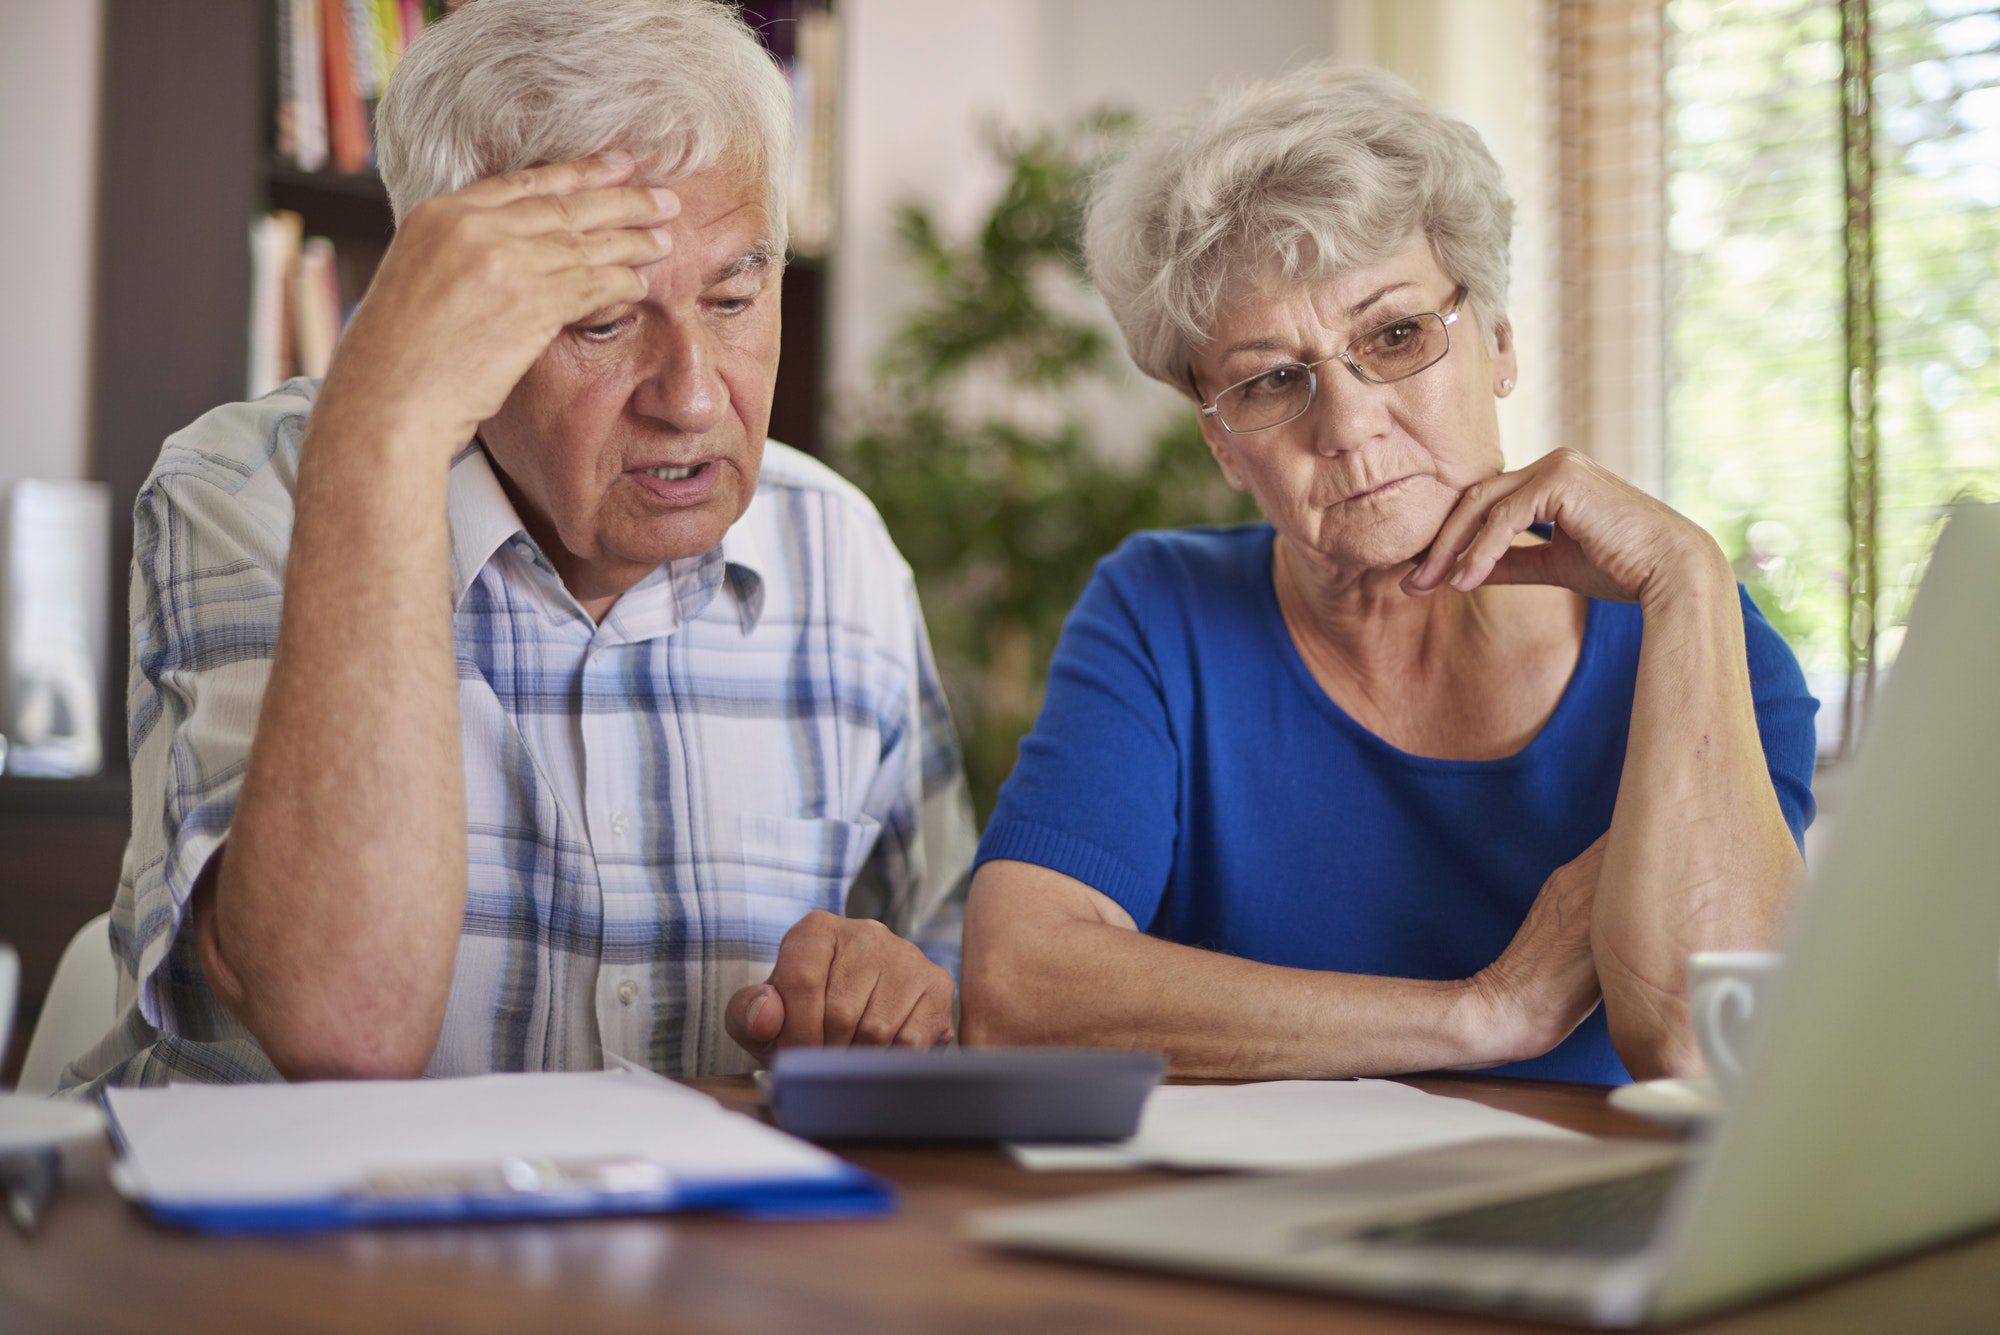 Couple sits and discusses problems with medicare cost and how Advantage plan could help.